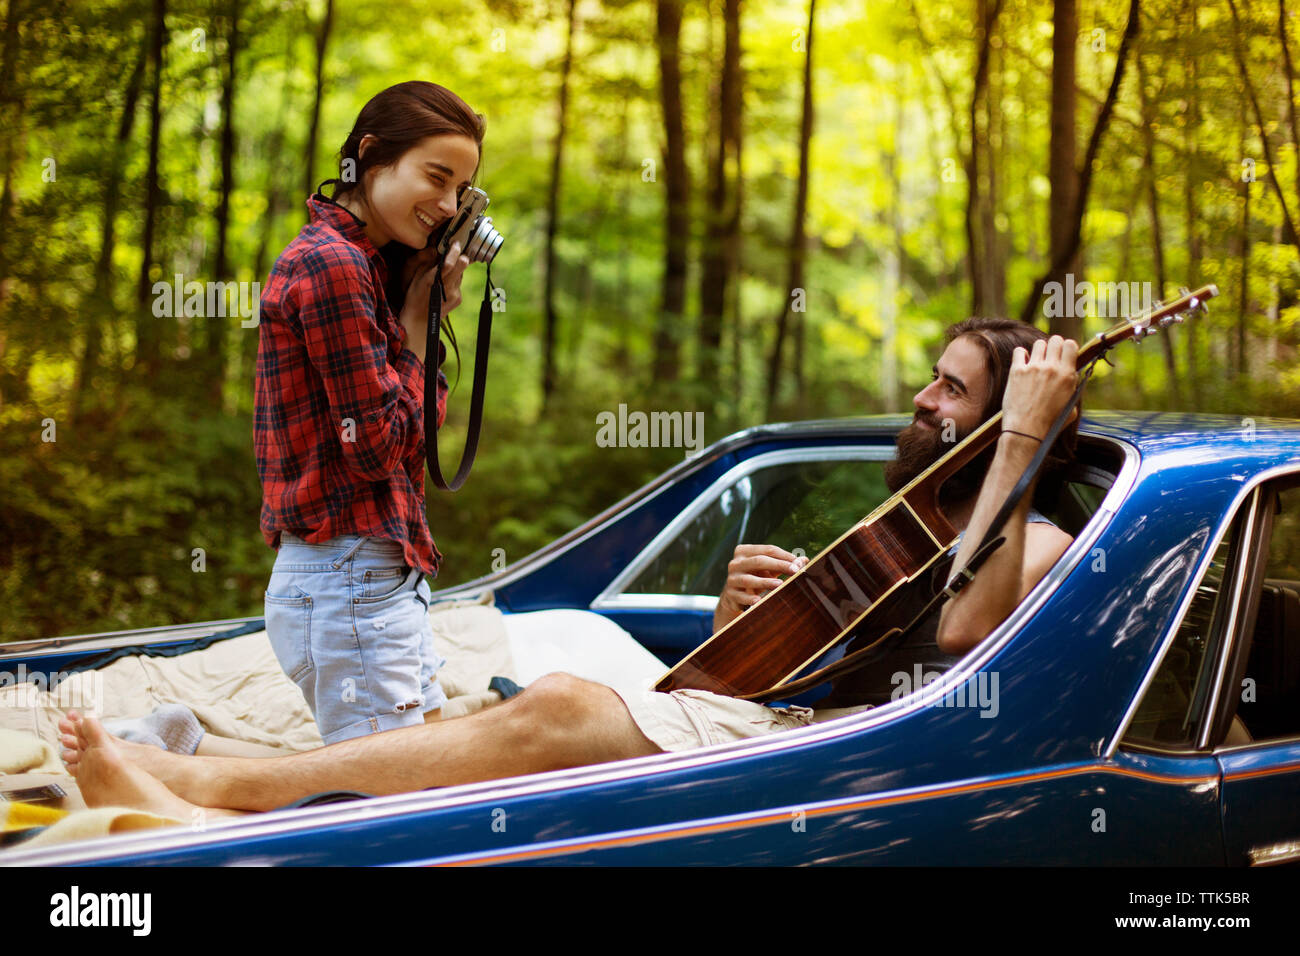 Woman photographing boyfriend holding guitar in pick-up truck at forest Stock Photo